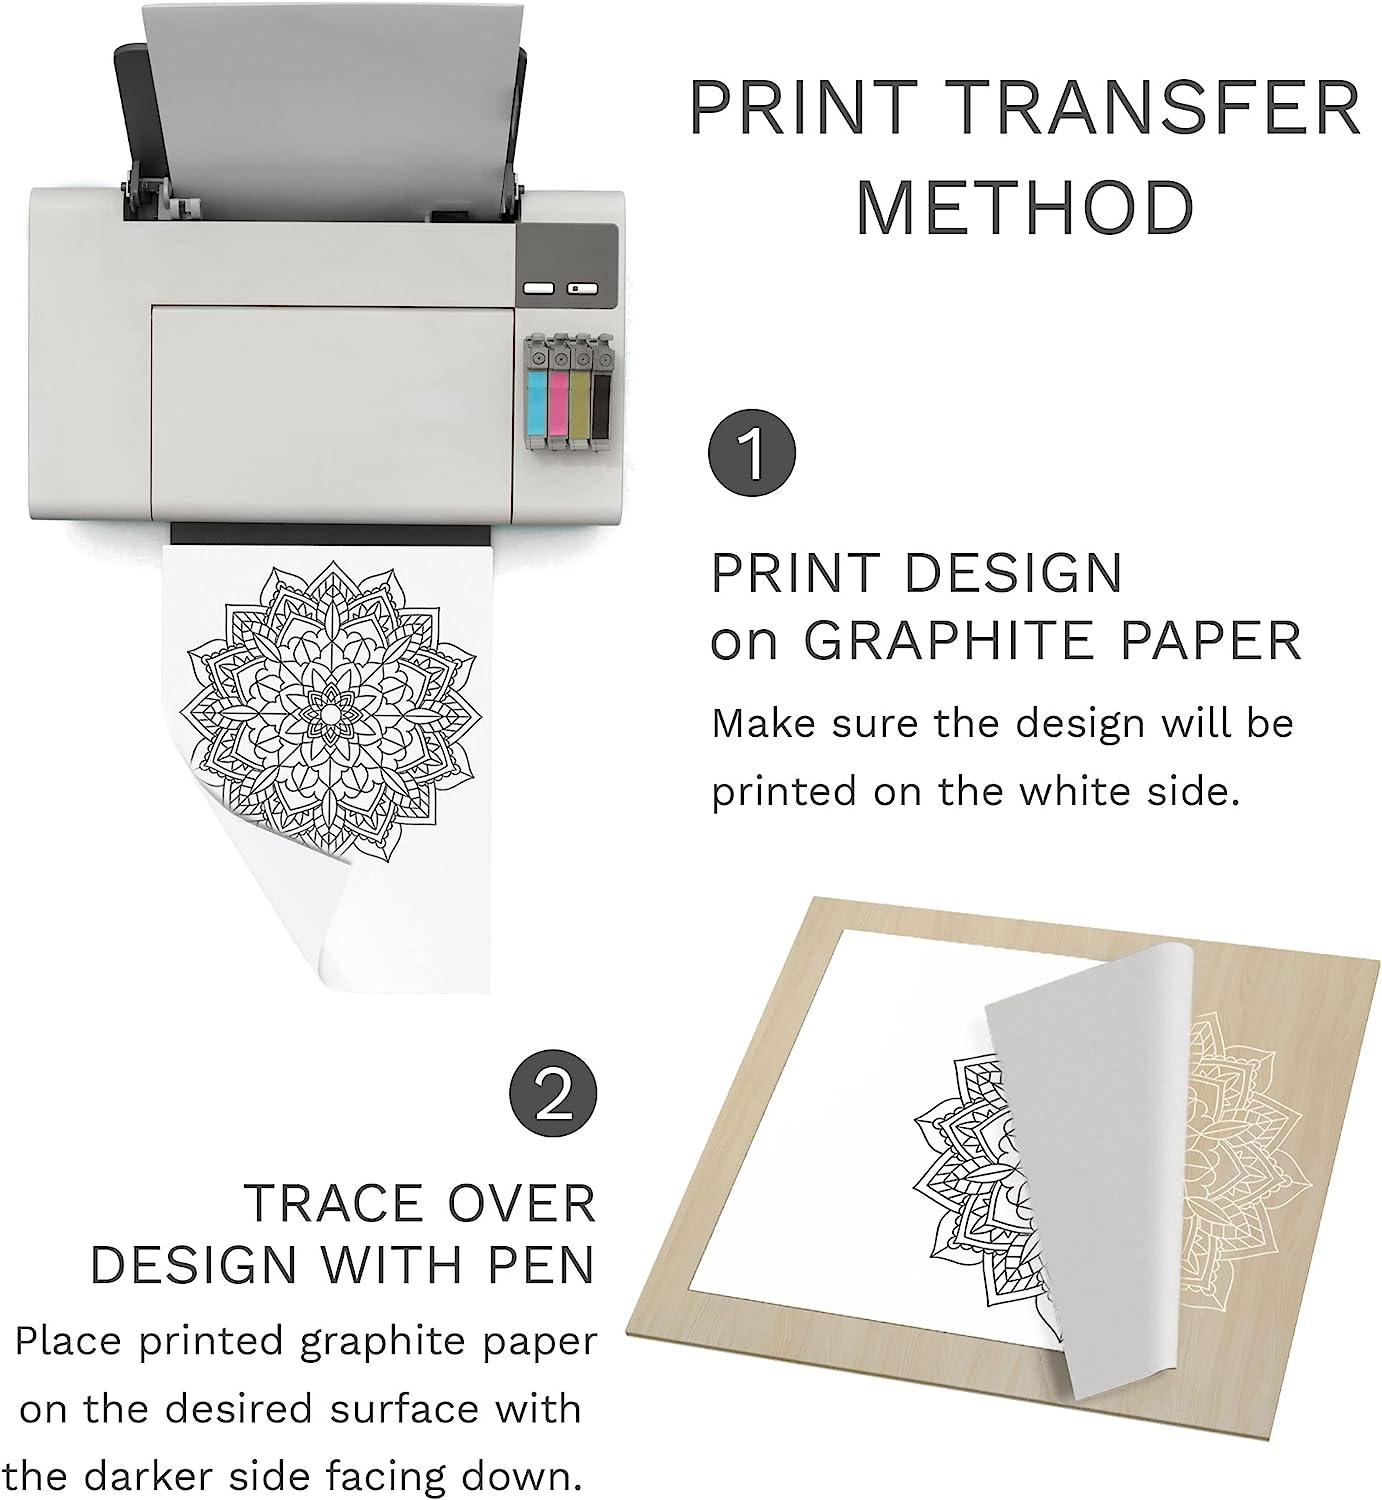 Transfer Paper for Drawing & Drafting -  UK